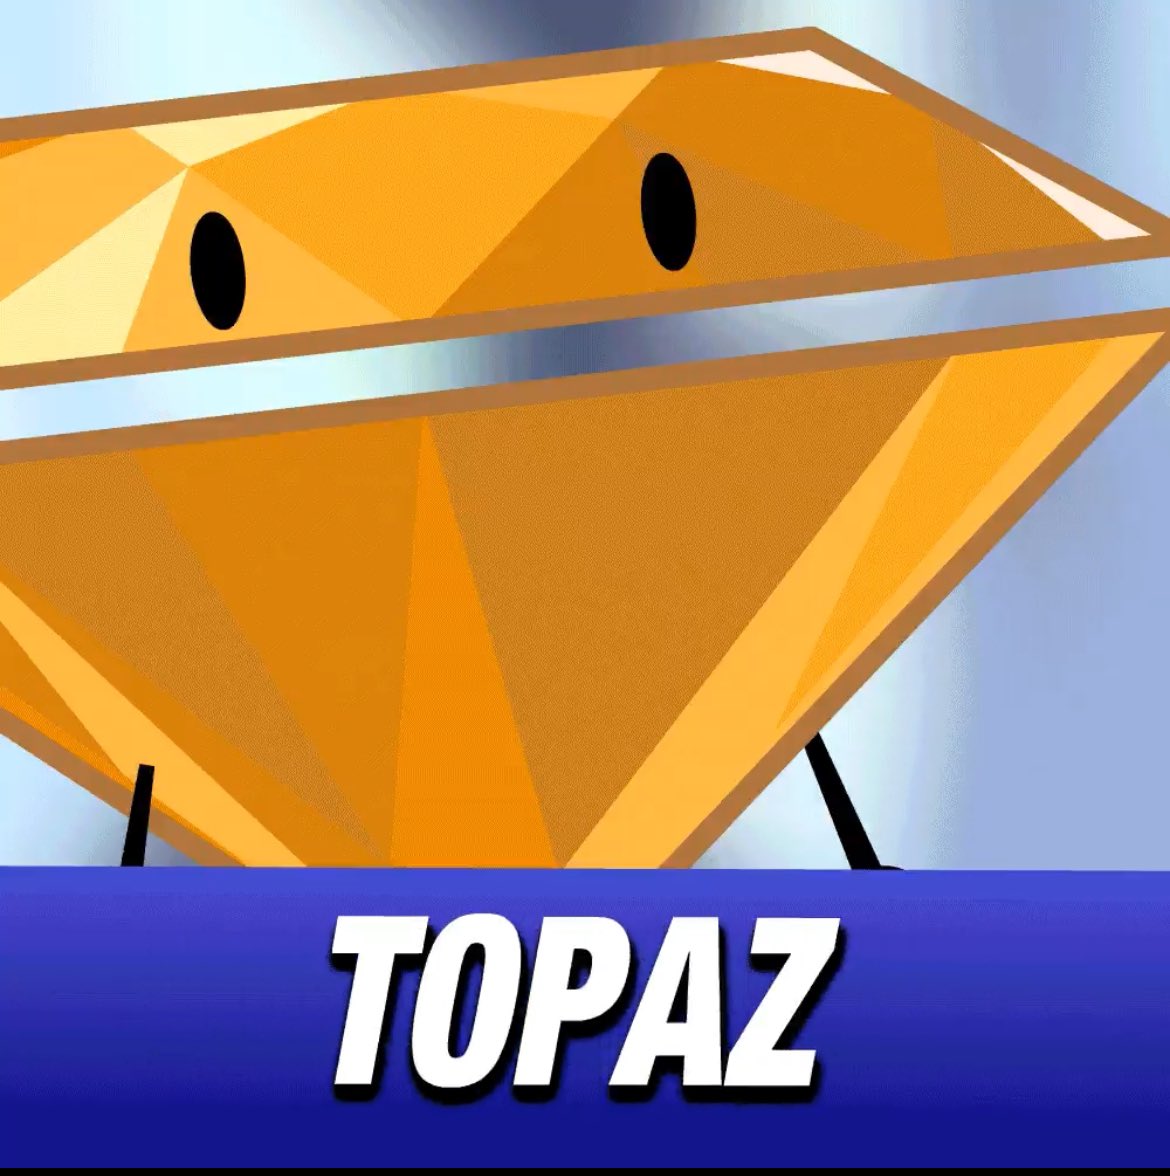 Hehe im topaz! One of my favourite of rubys sisters’ designs tbh lol